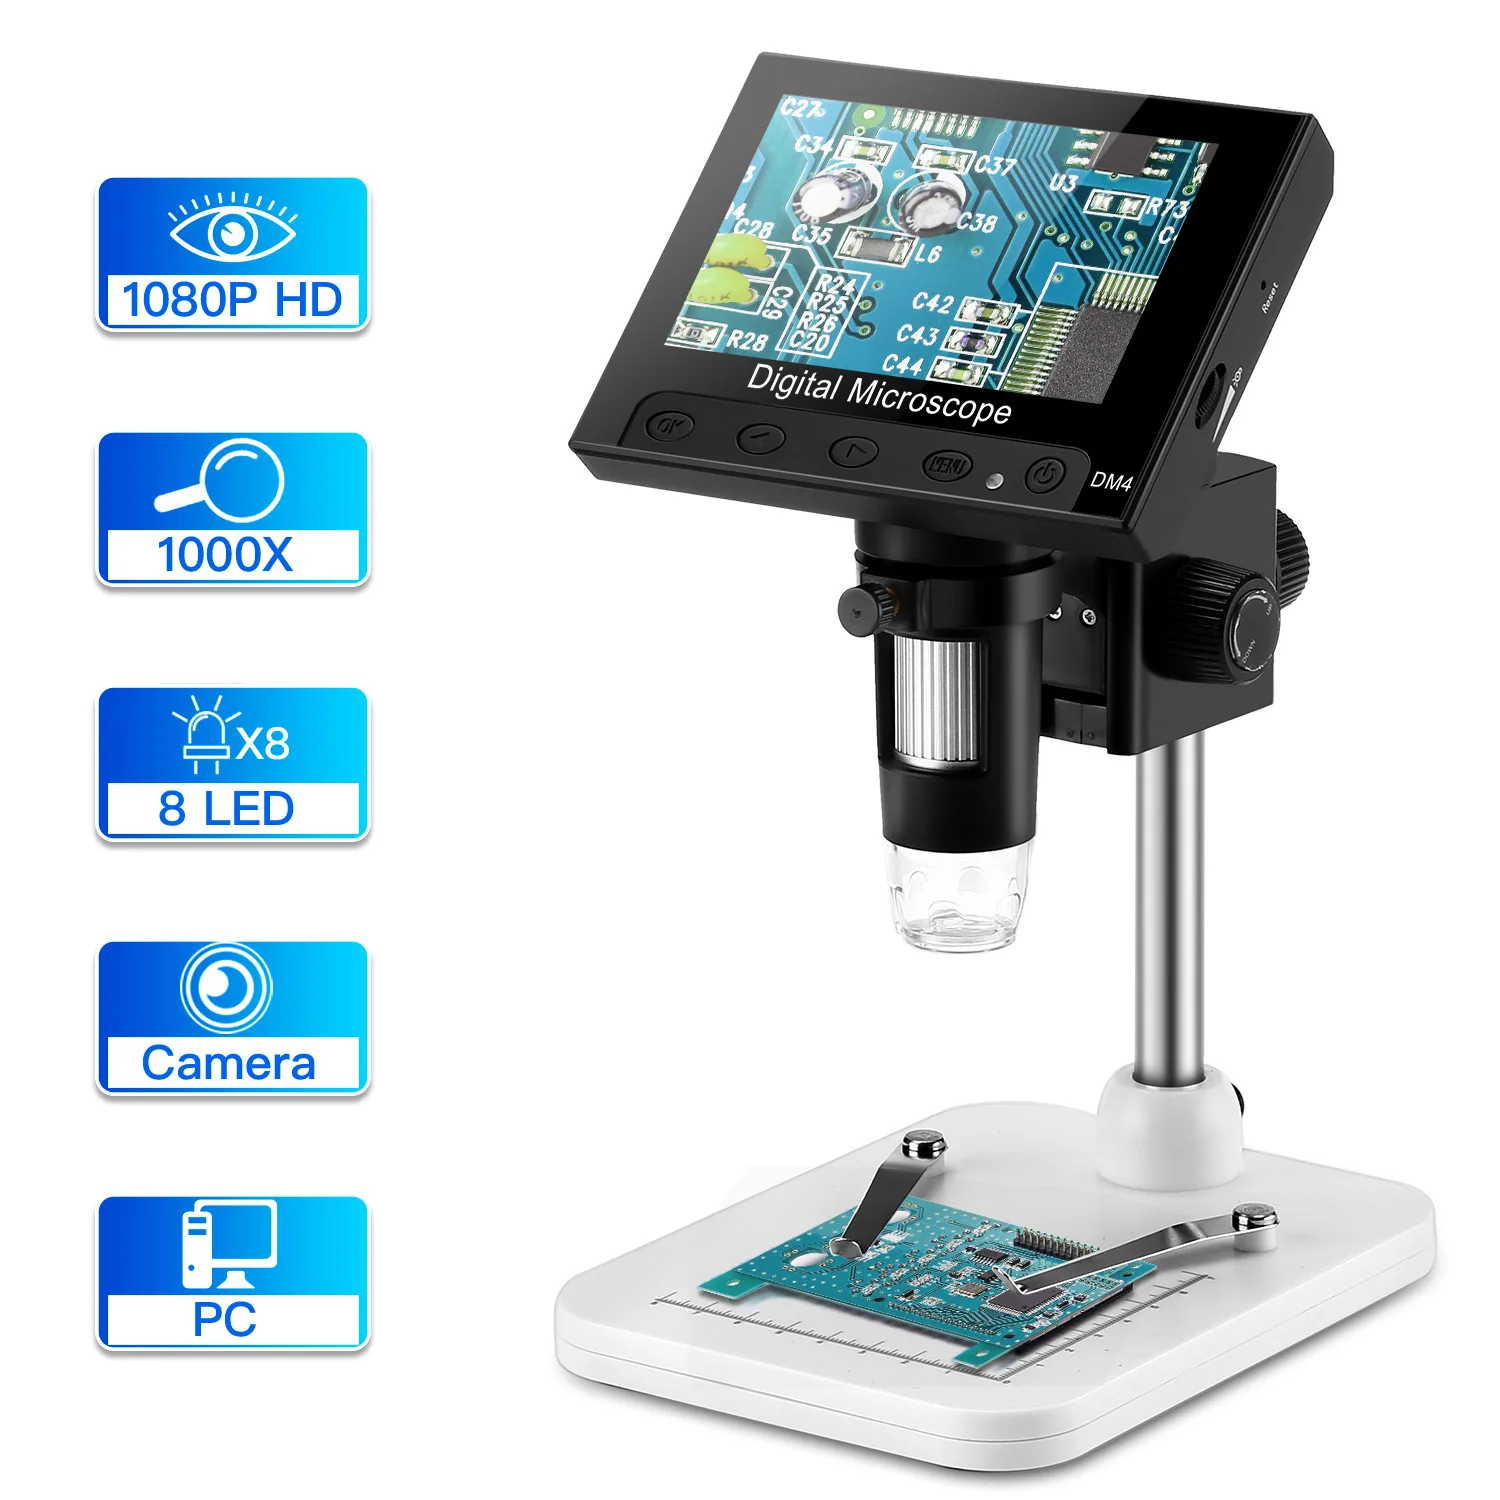 

4.3" LCD Display HD 720P DM4 1000X Zoom Digital Microscope Endoscope Record with 8 LEDs Stand for Repair Soldering